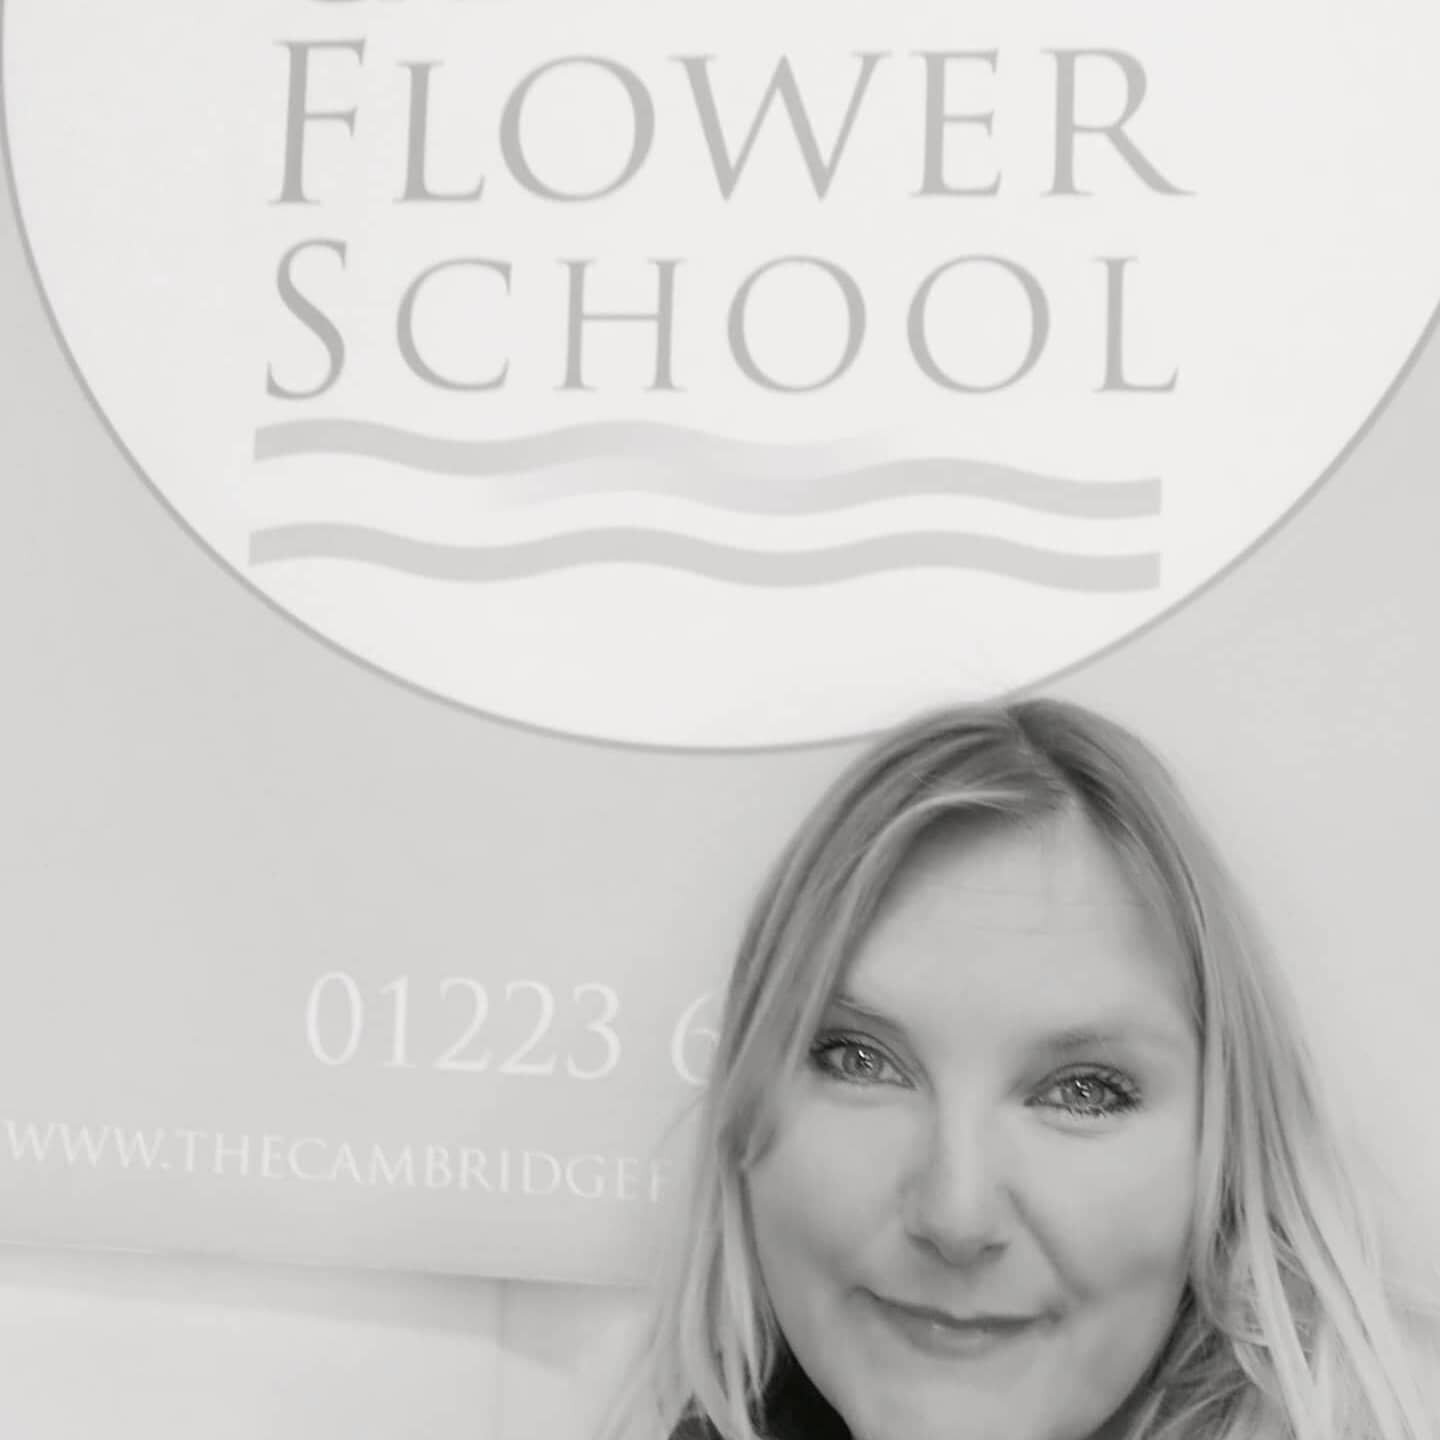 Everyday is a school day! 

I have had such a great day with Sarah from The Cambridge Flower School today. 

Having postponed twice due to COVID restrictions, we finally got the go ahead for my 1-2-1 bespoke funeral flower course.

It was so lovely t